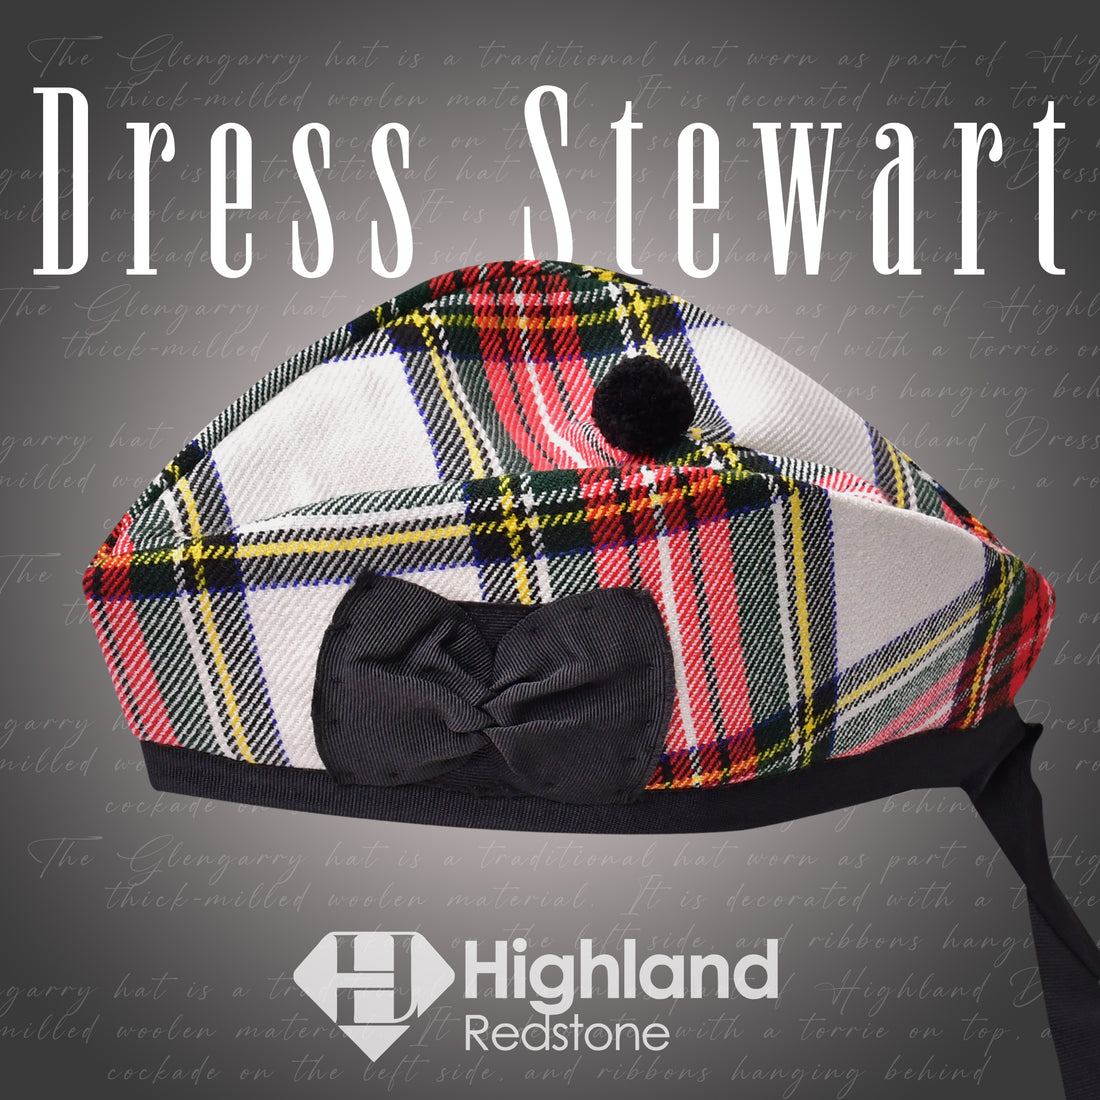 Dress Stewart Tartan Glengarry featuring the iconic red, white, and blue pattern of the Stewart Clan, made from high-quality materials.